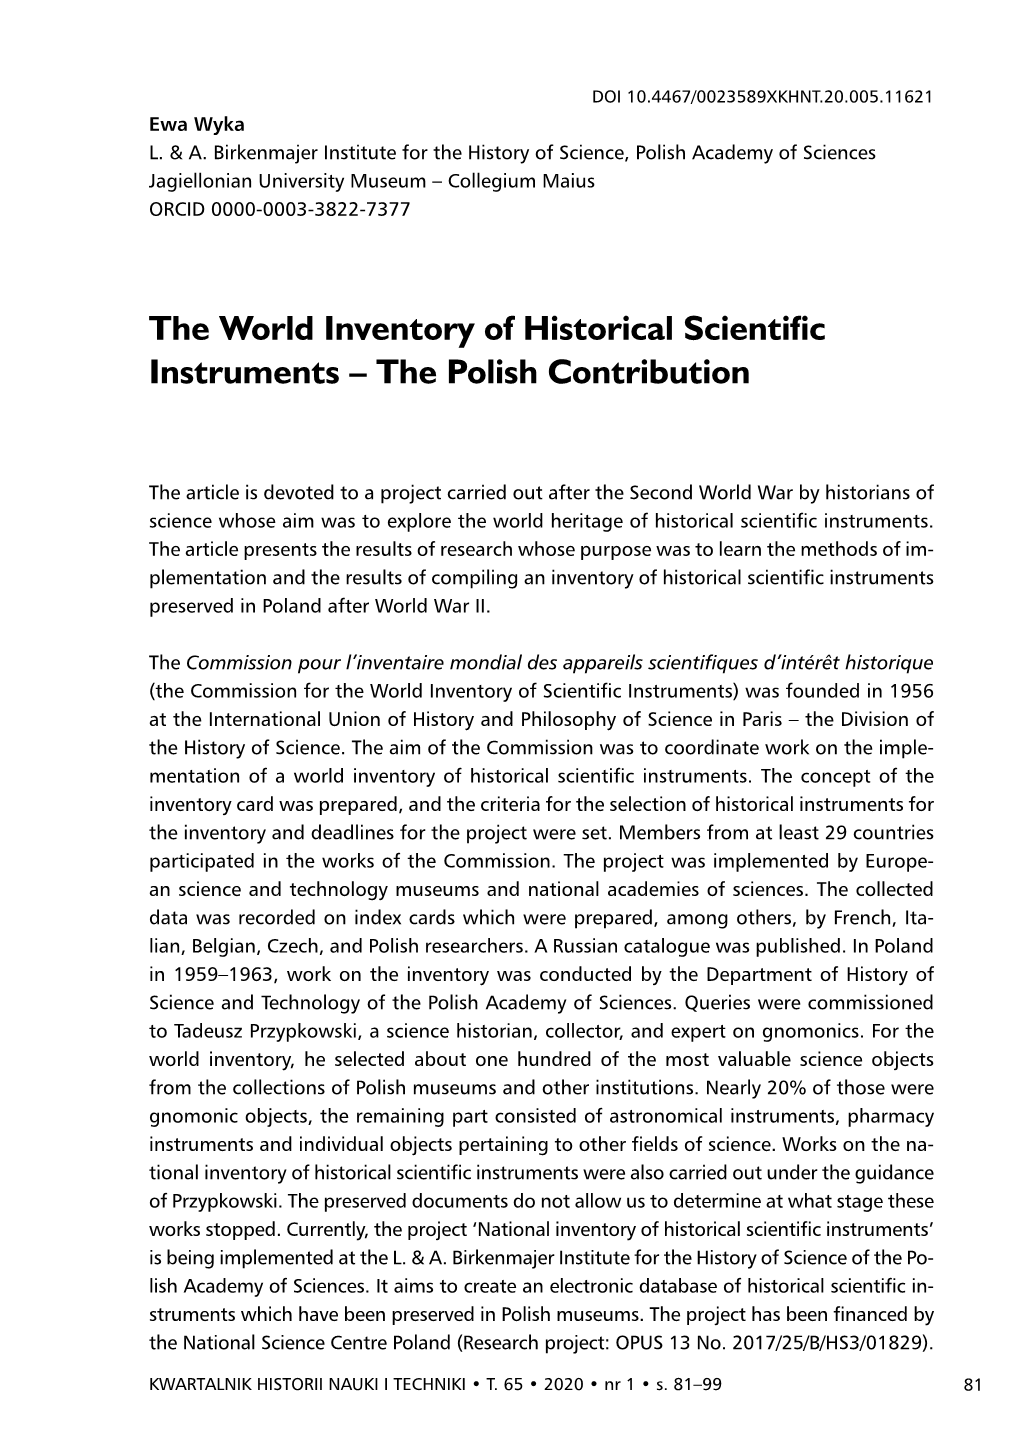 The World Inventory of Historical Scientific Instruments – the Polish